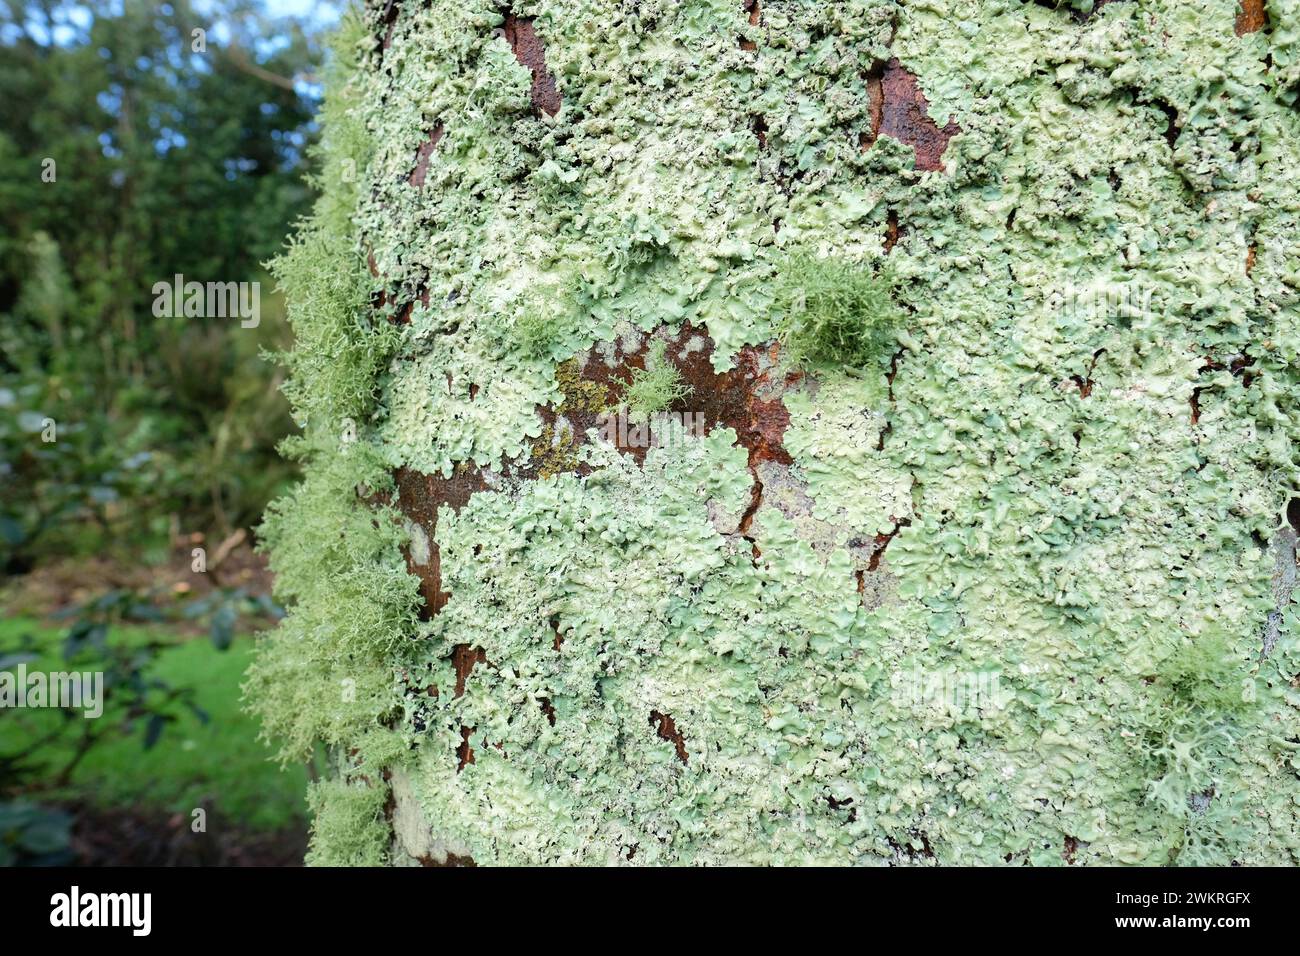 A variety of lichen types growing on a tree trunk in Dumfries and Galloway Scotland Stock Photo